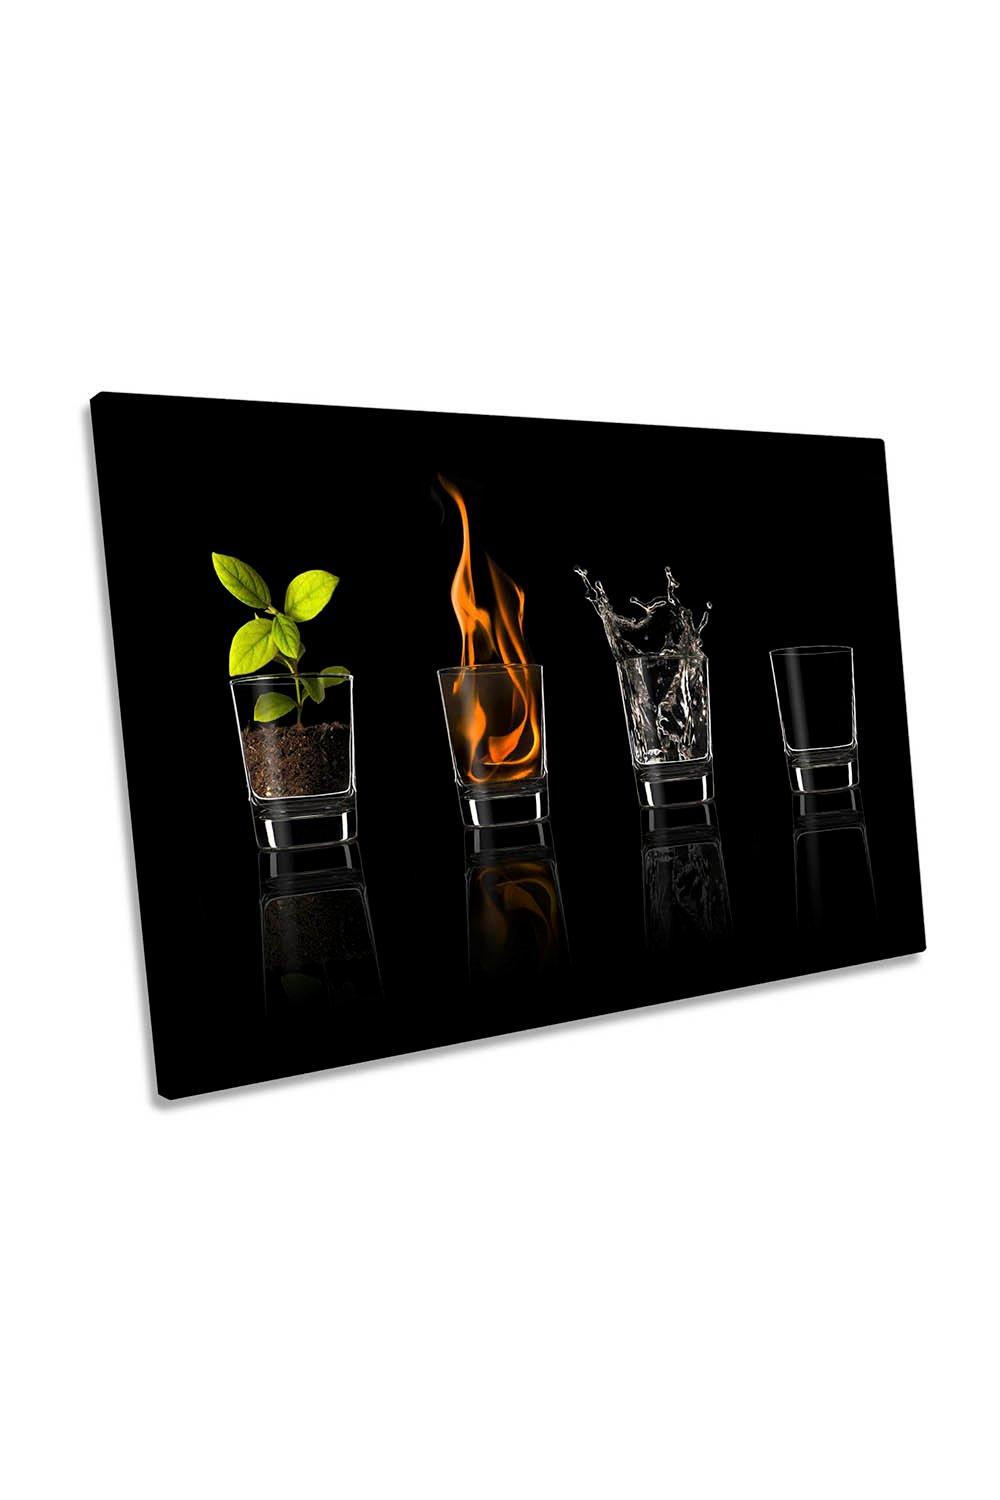 Elements Water Fire Earth Air Canvas Wall Art Picture Print